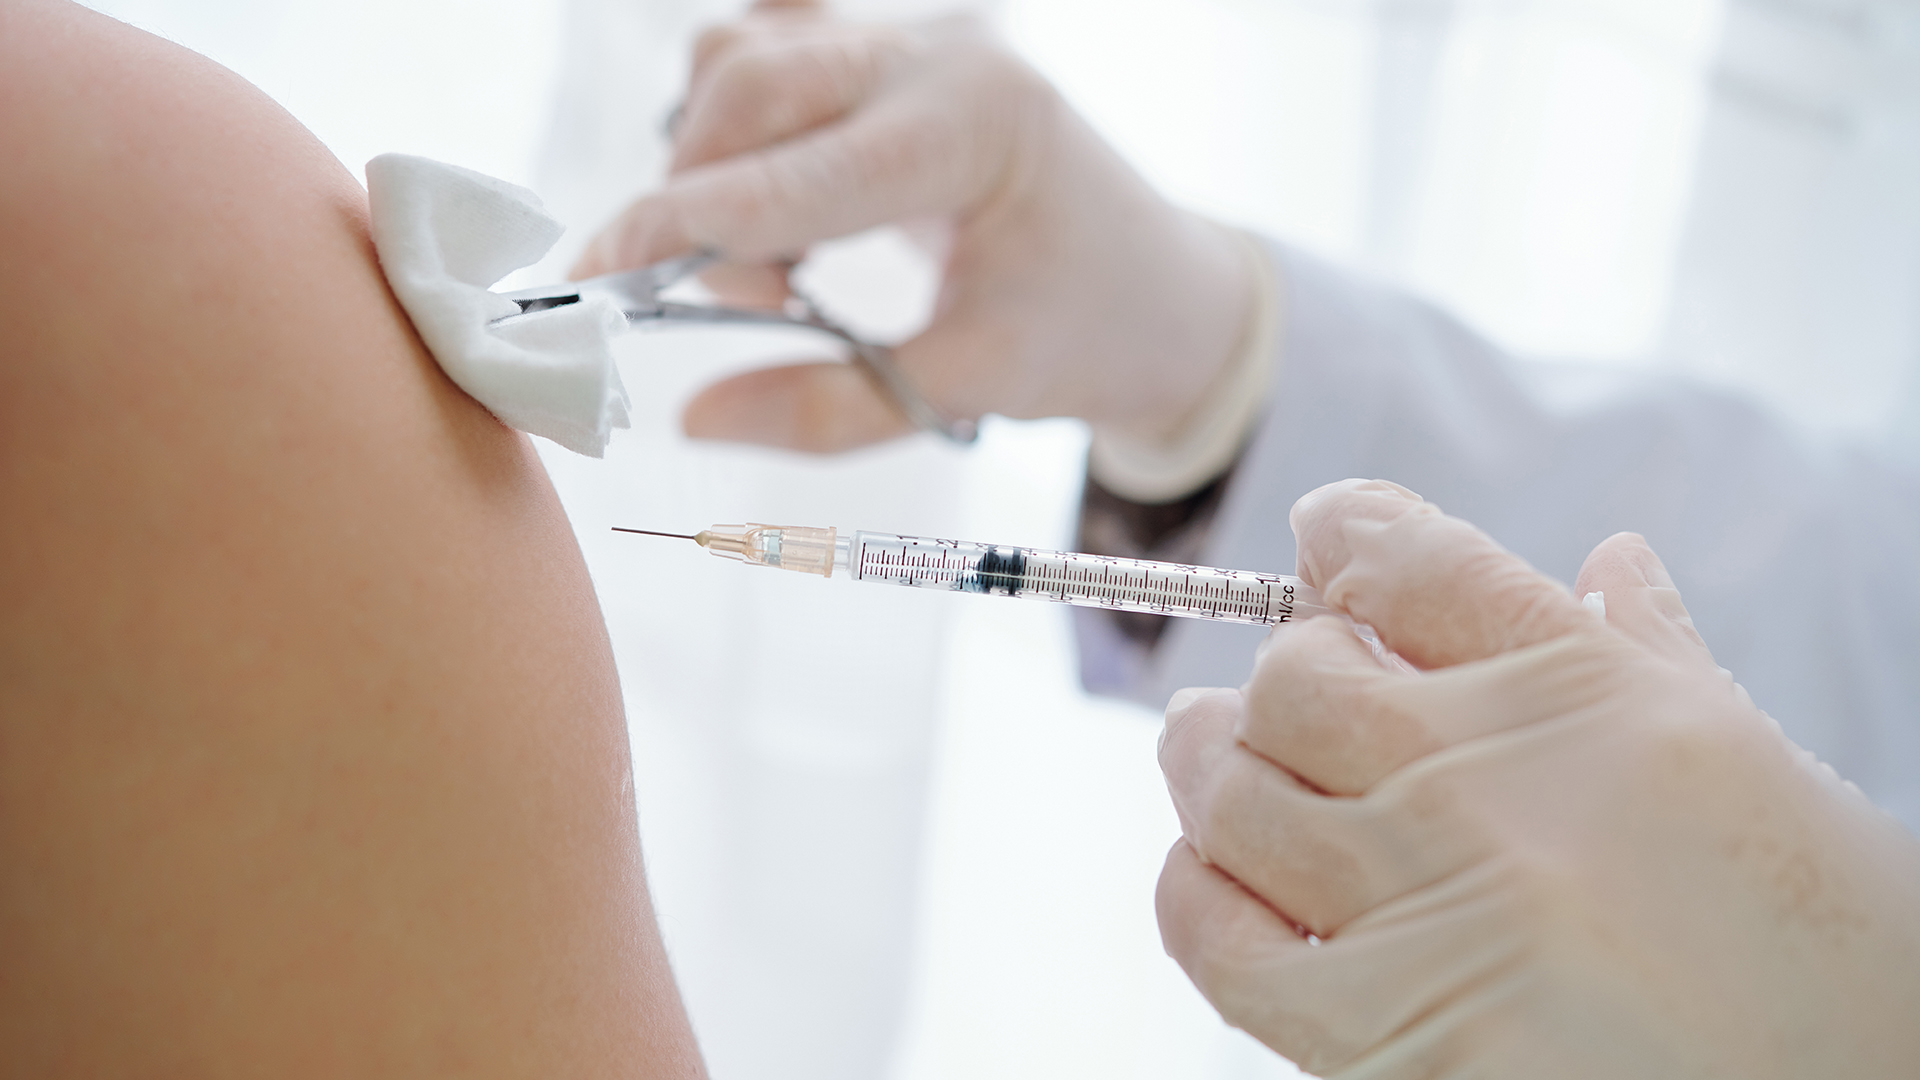 Shingles vaccine offered free to people 75 and older starting in May